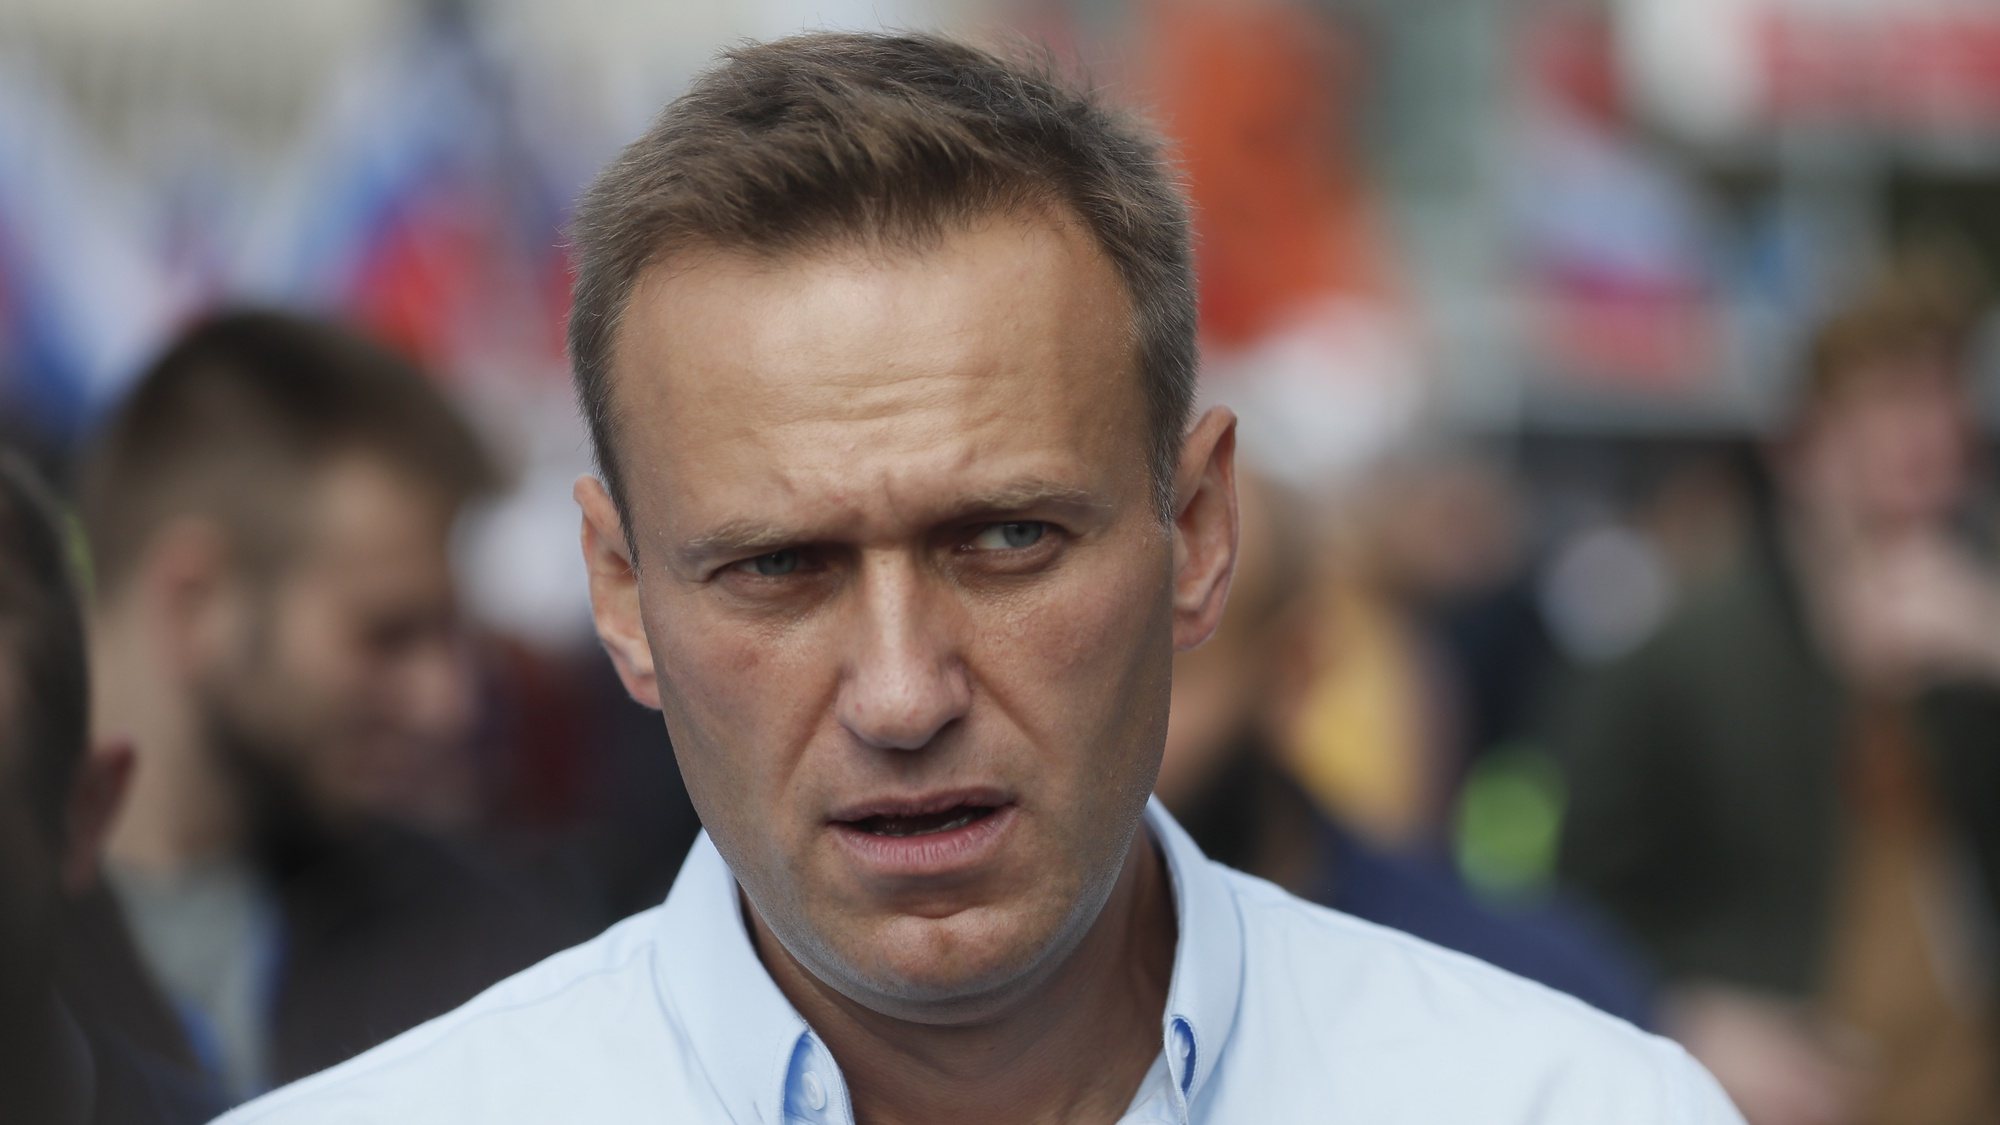 epa08908890 (FILE) - Russian Opposition activist Alexei Navalny attends a rally in support of opposition candidates in the Moscow City Duma elections in downtown of Moscow, Russia, 20 July 2019 (reissued 29 December 2020). According to Navalny&#039;s lawyer, Russian officials threaten to jail Alexey Navalny for failing to comply with terms of a suspended sentence if he doesn&#039;t show up for a hearing in Moscow, Russia on 30 December 2020.  EPA/SERGEI ILNITSKY *** Local Caption *** 56313847